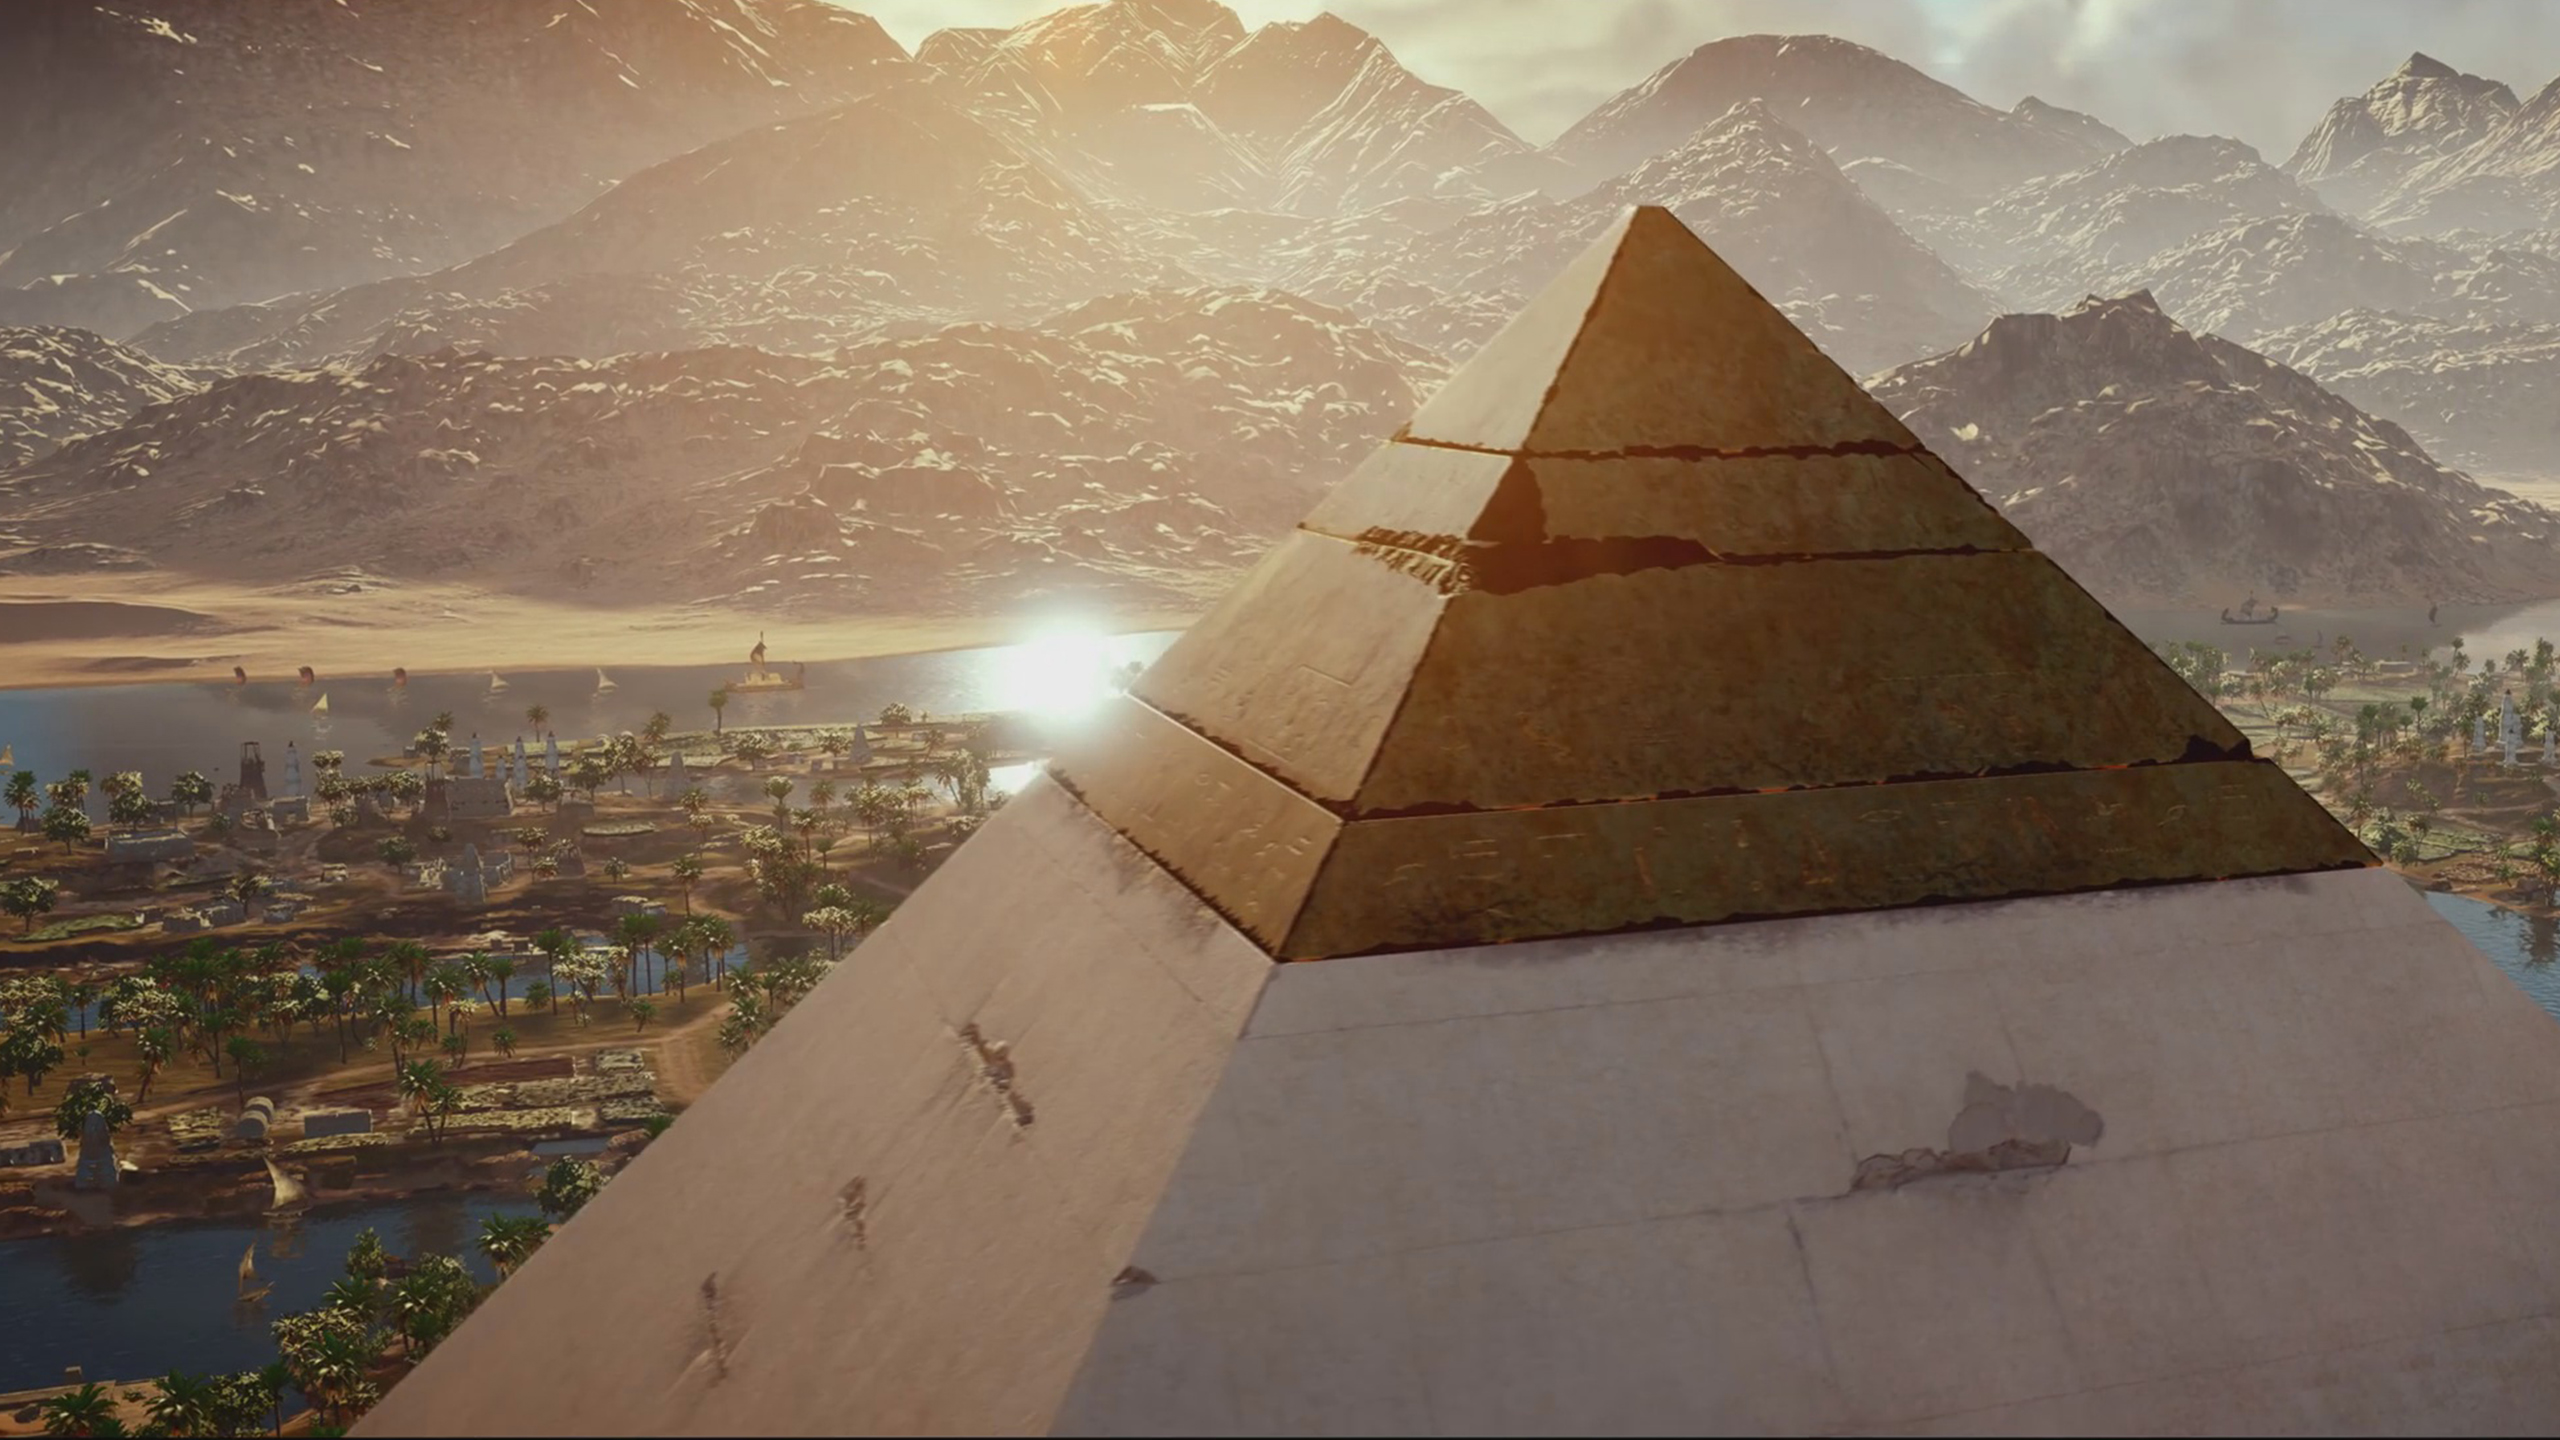 The pyramids penetration recorded